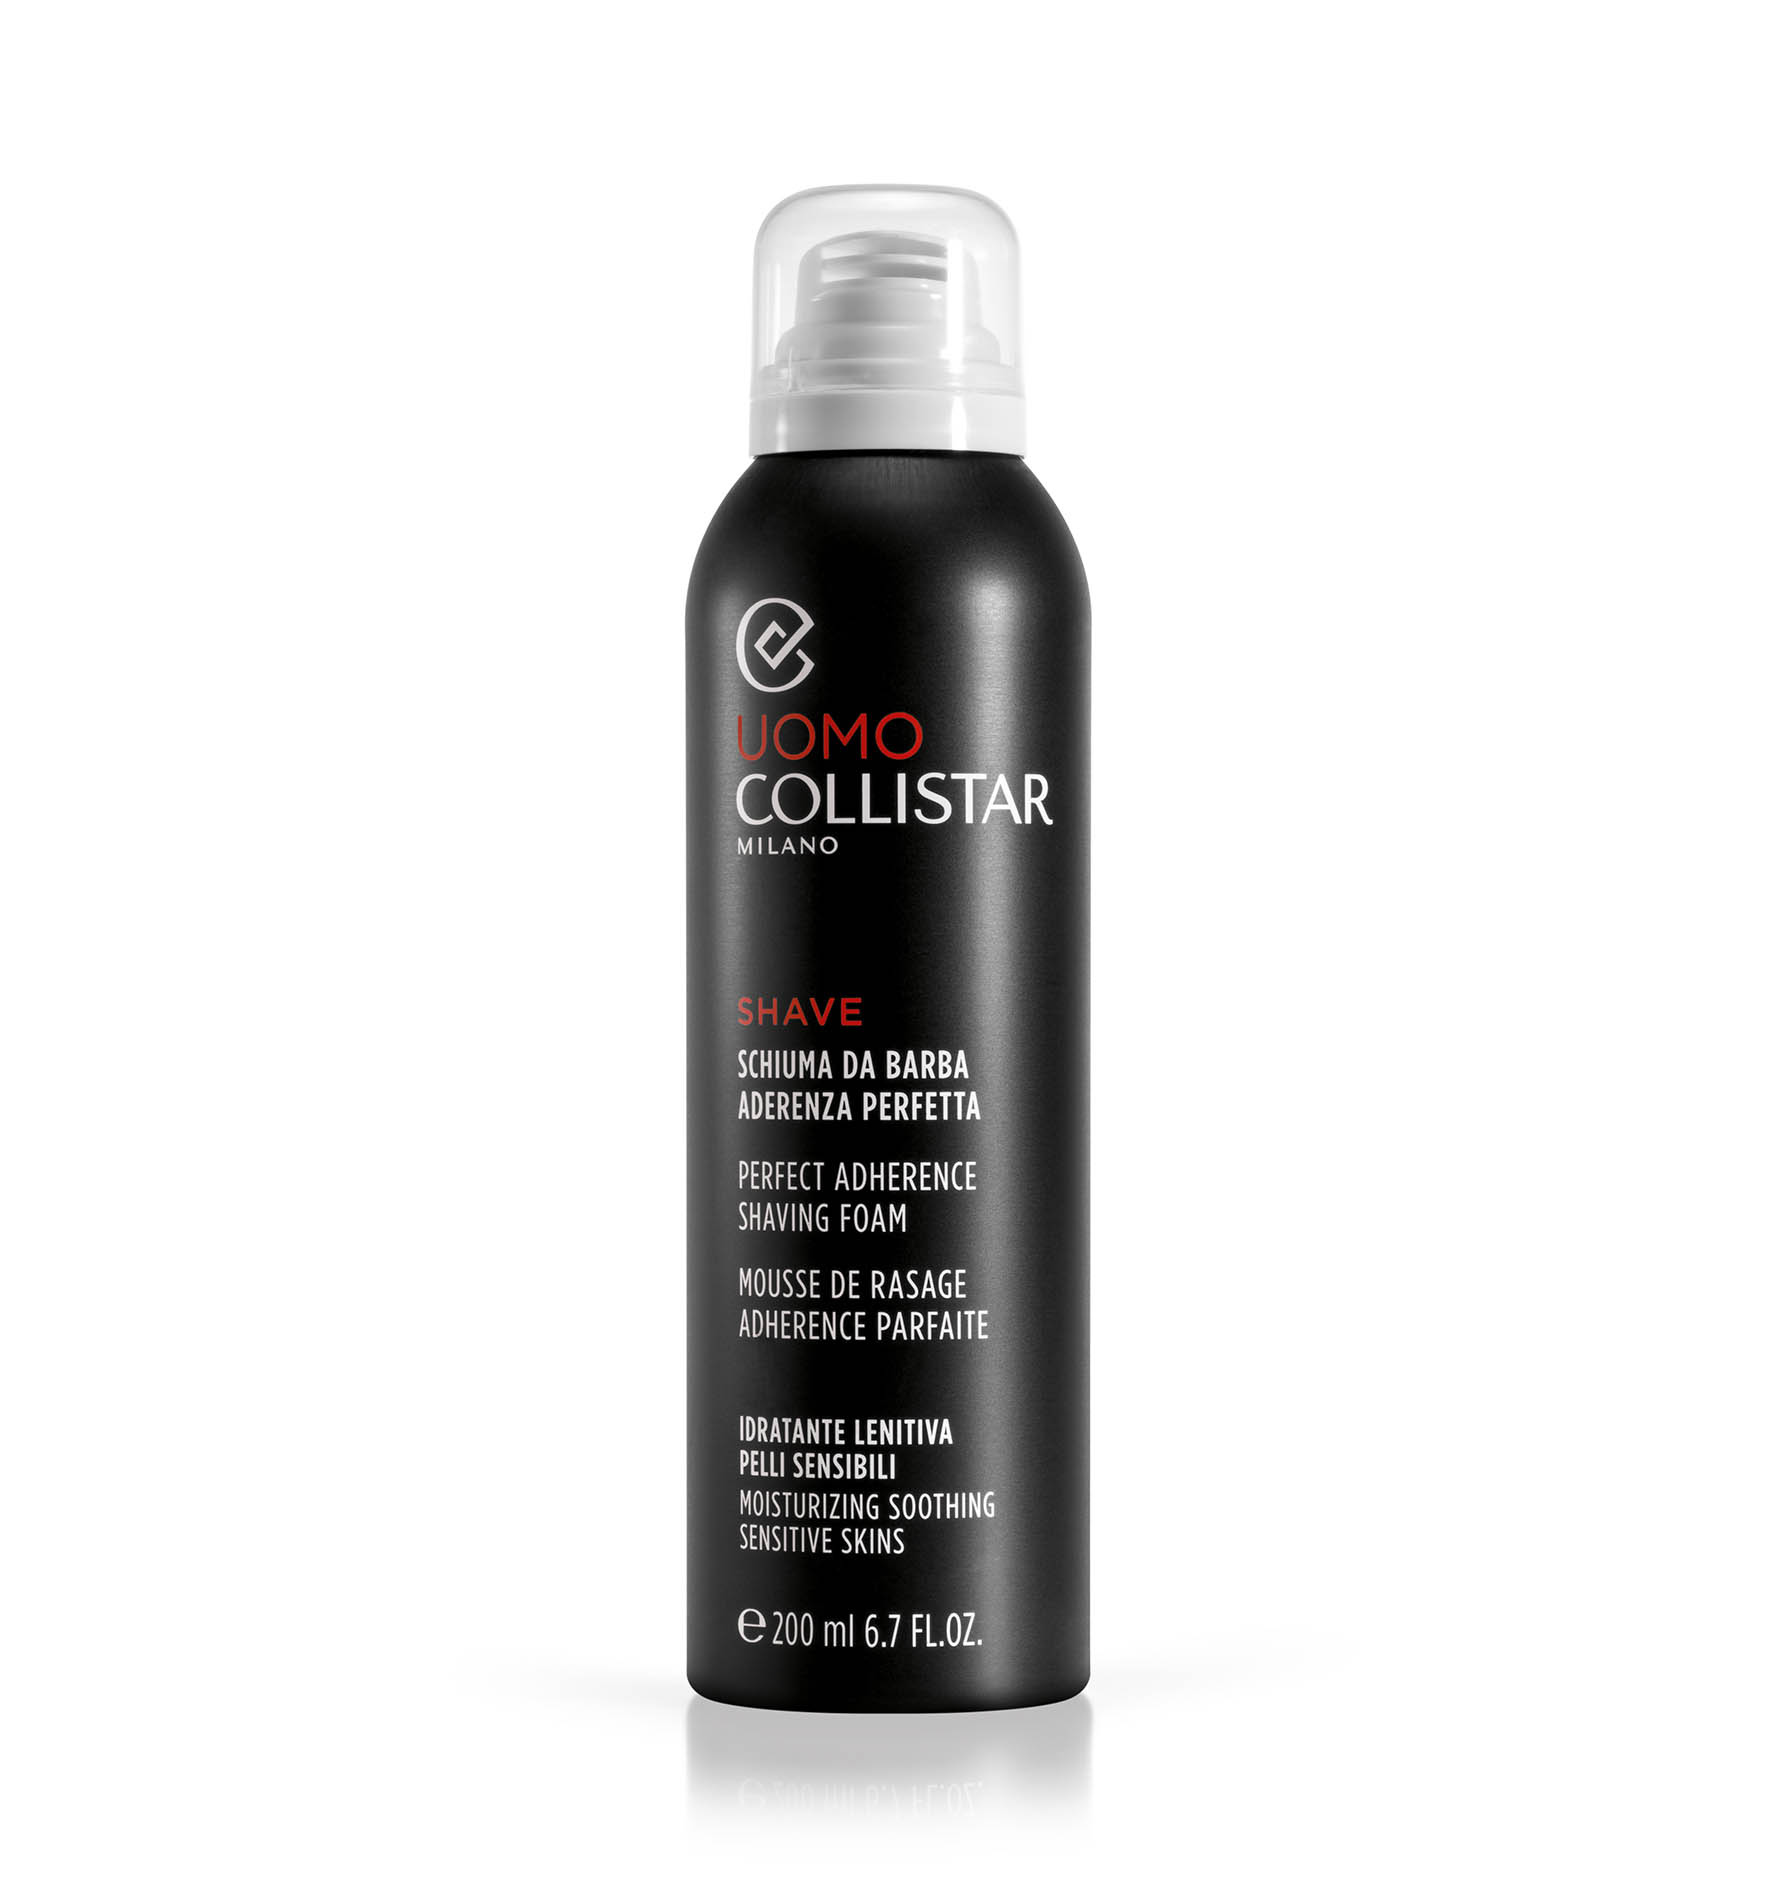 PERFECT ADHERENCE SHAVING FOAM - bestsellers | Collistar - Shop Online Ufficiale